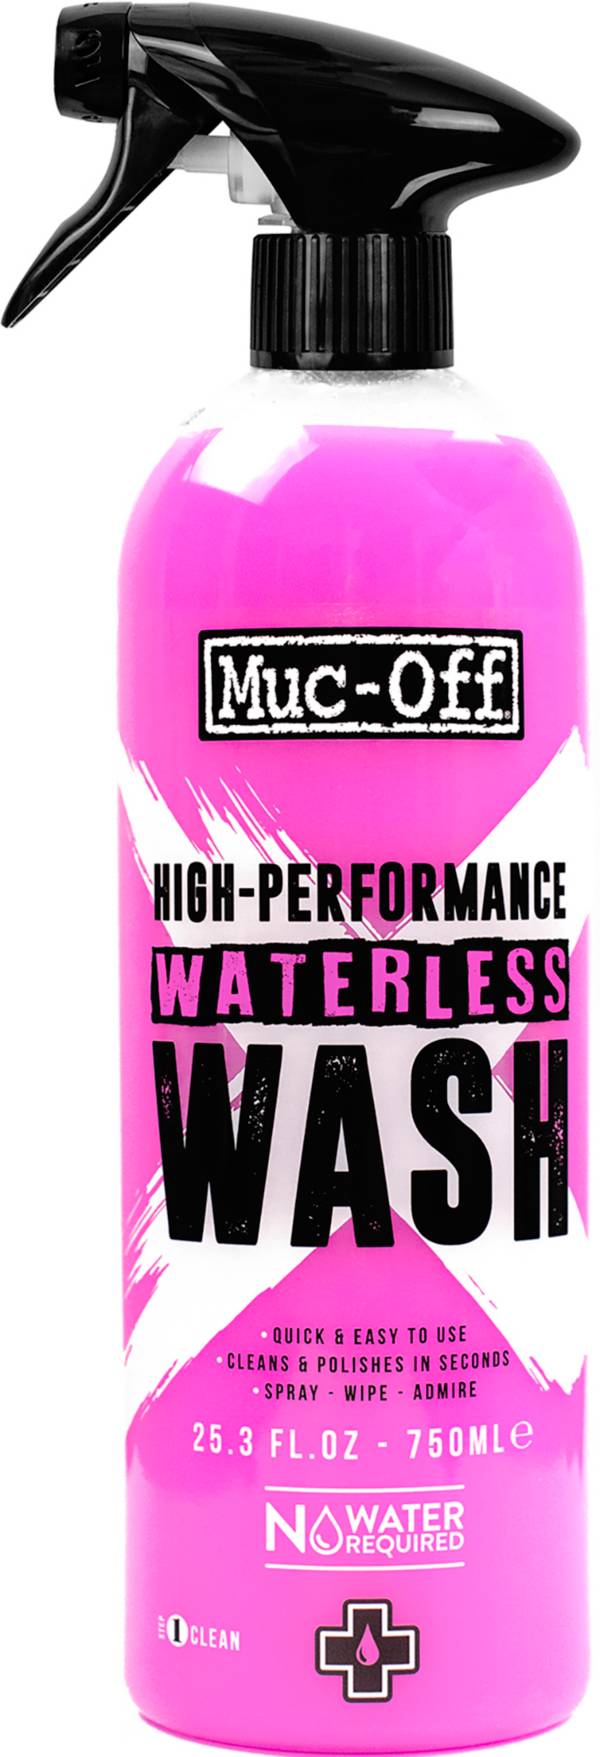 Muc-Off High Performance Waterless Wash, 750ml product image